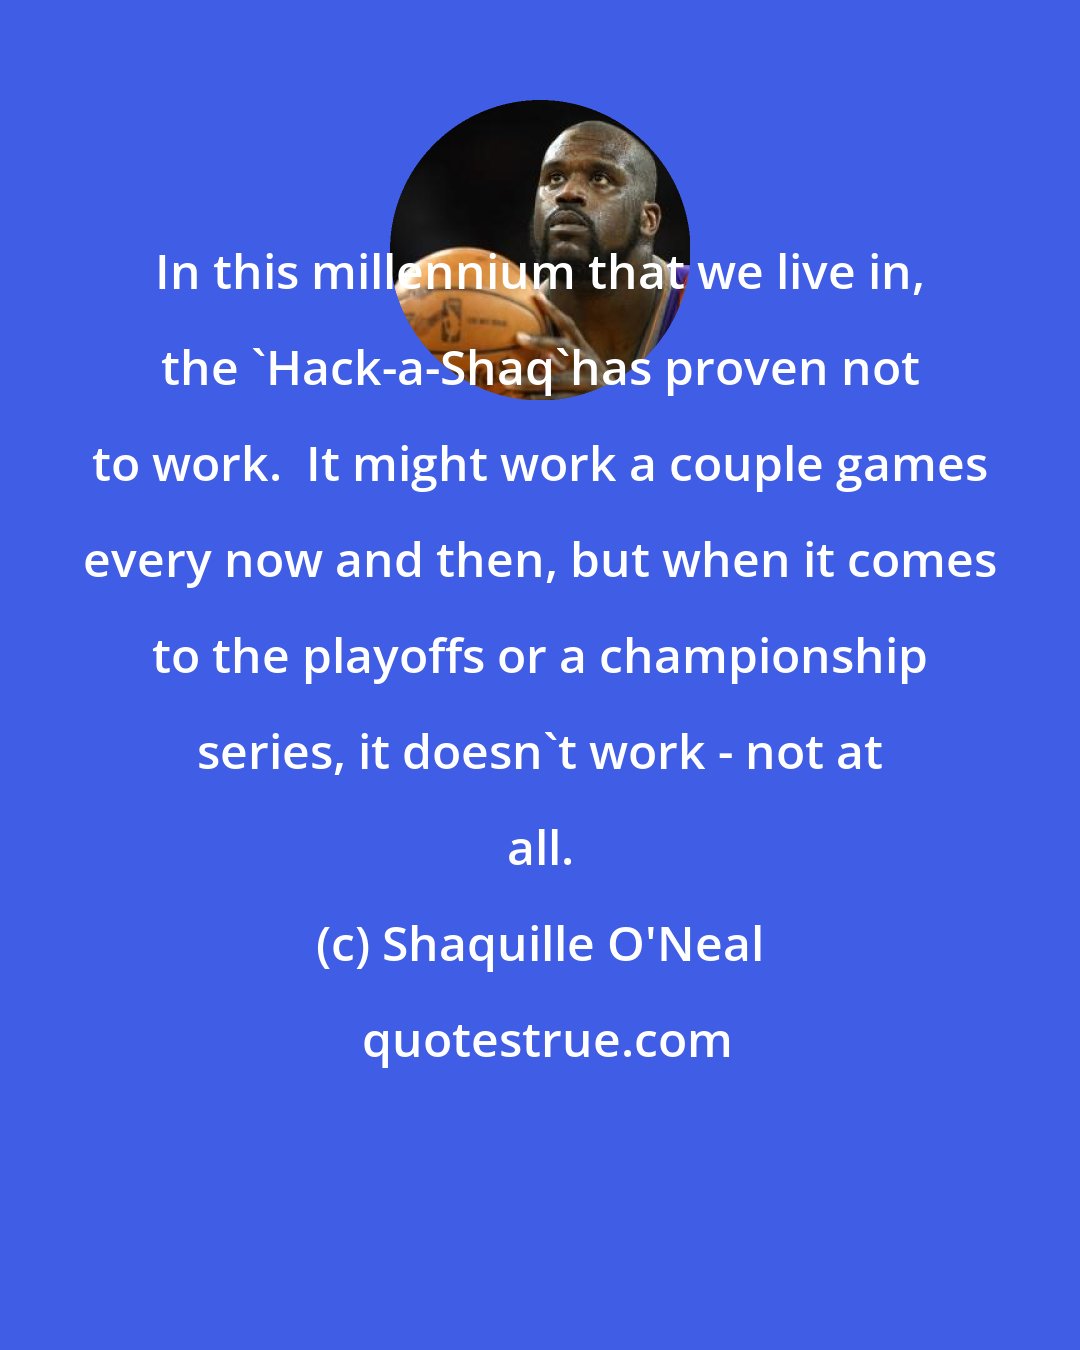 Shaquille O'Neal: In this millennium that we live in, the 'Hack-a-Shaq'has proven not to work.  It might work a couple games every now and then, but when it comes to the playoffs or a championship series, it doesn't work - not at all.